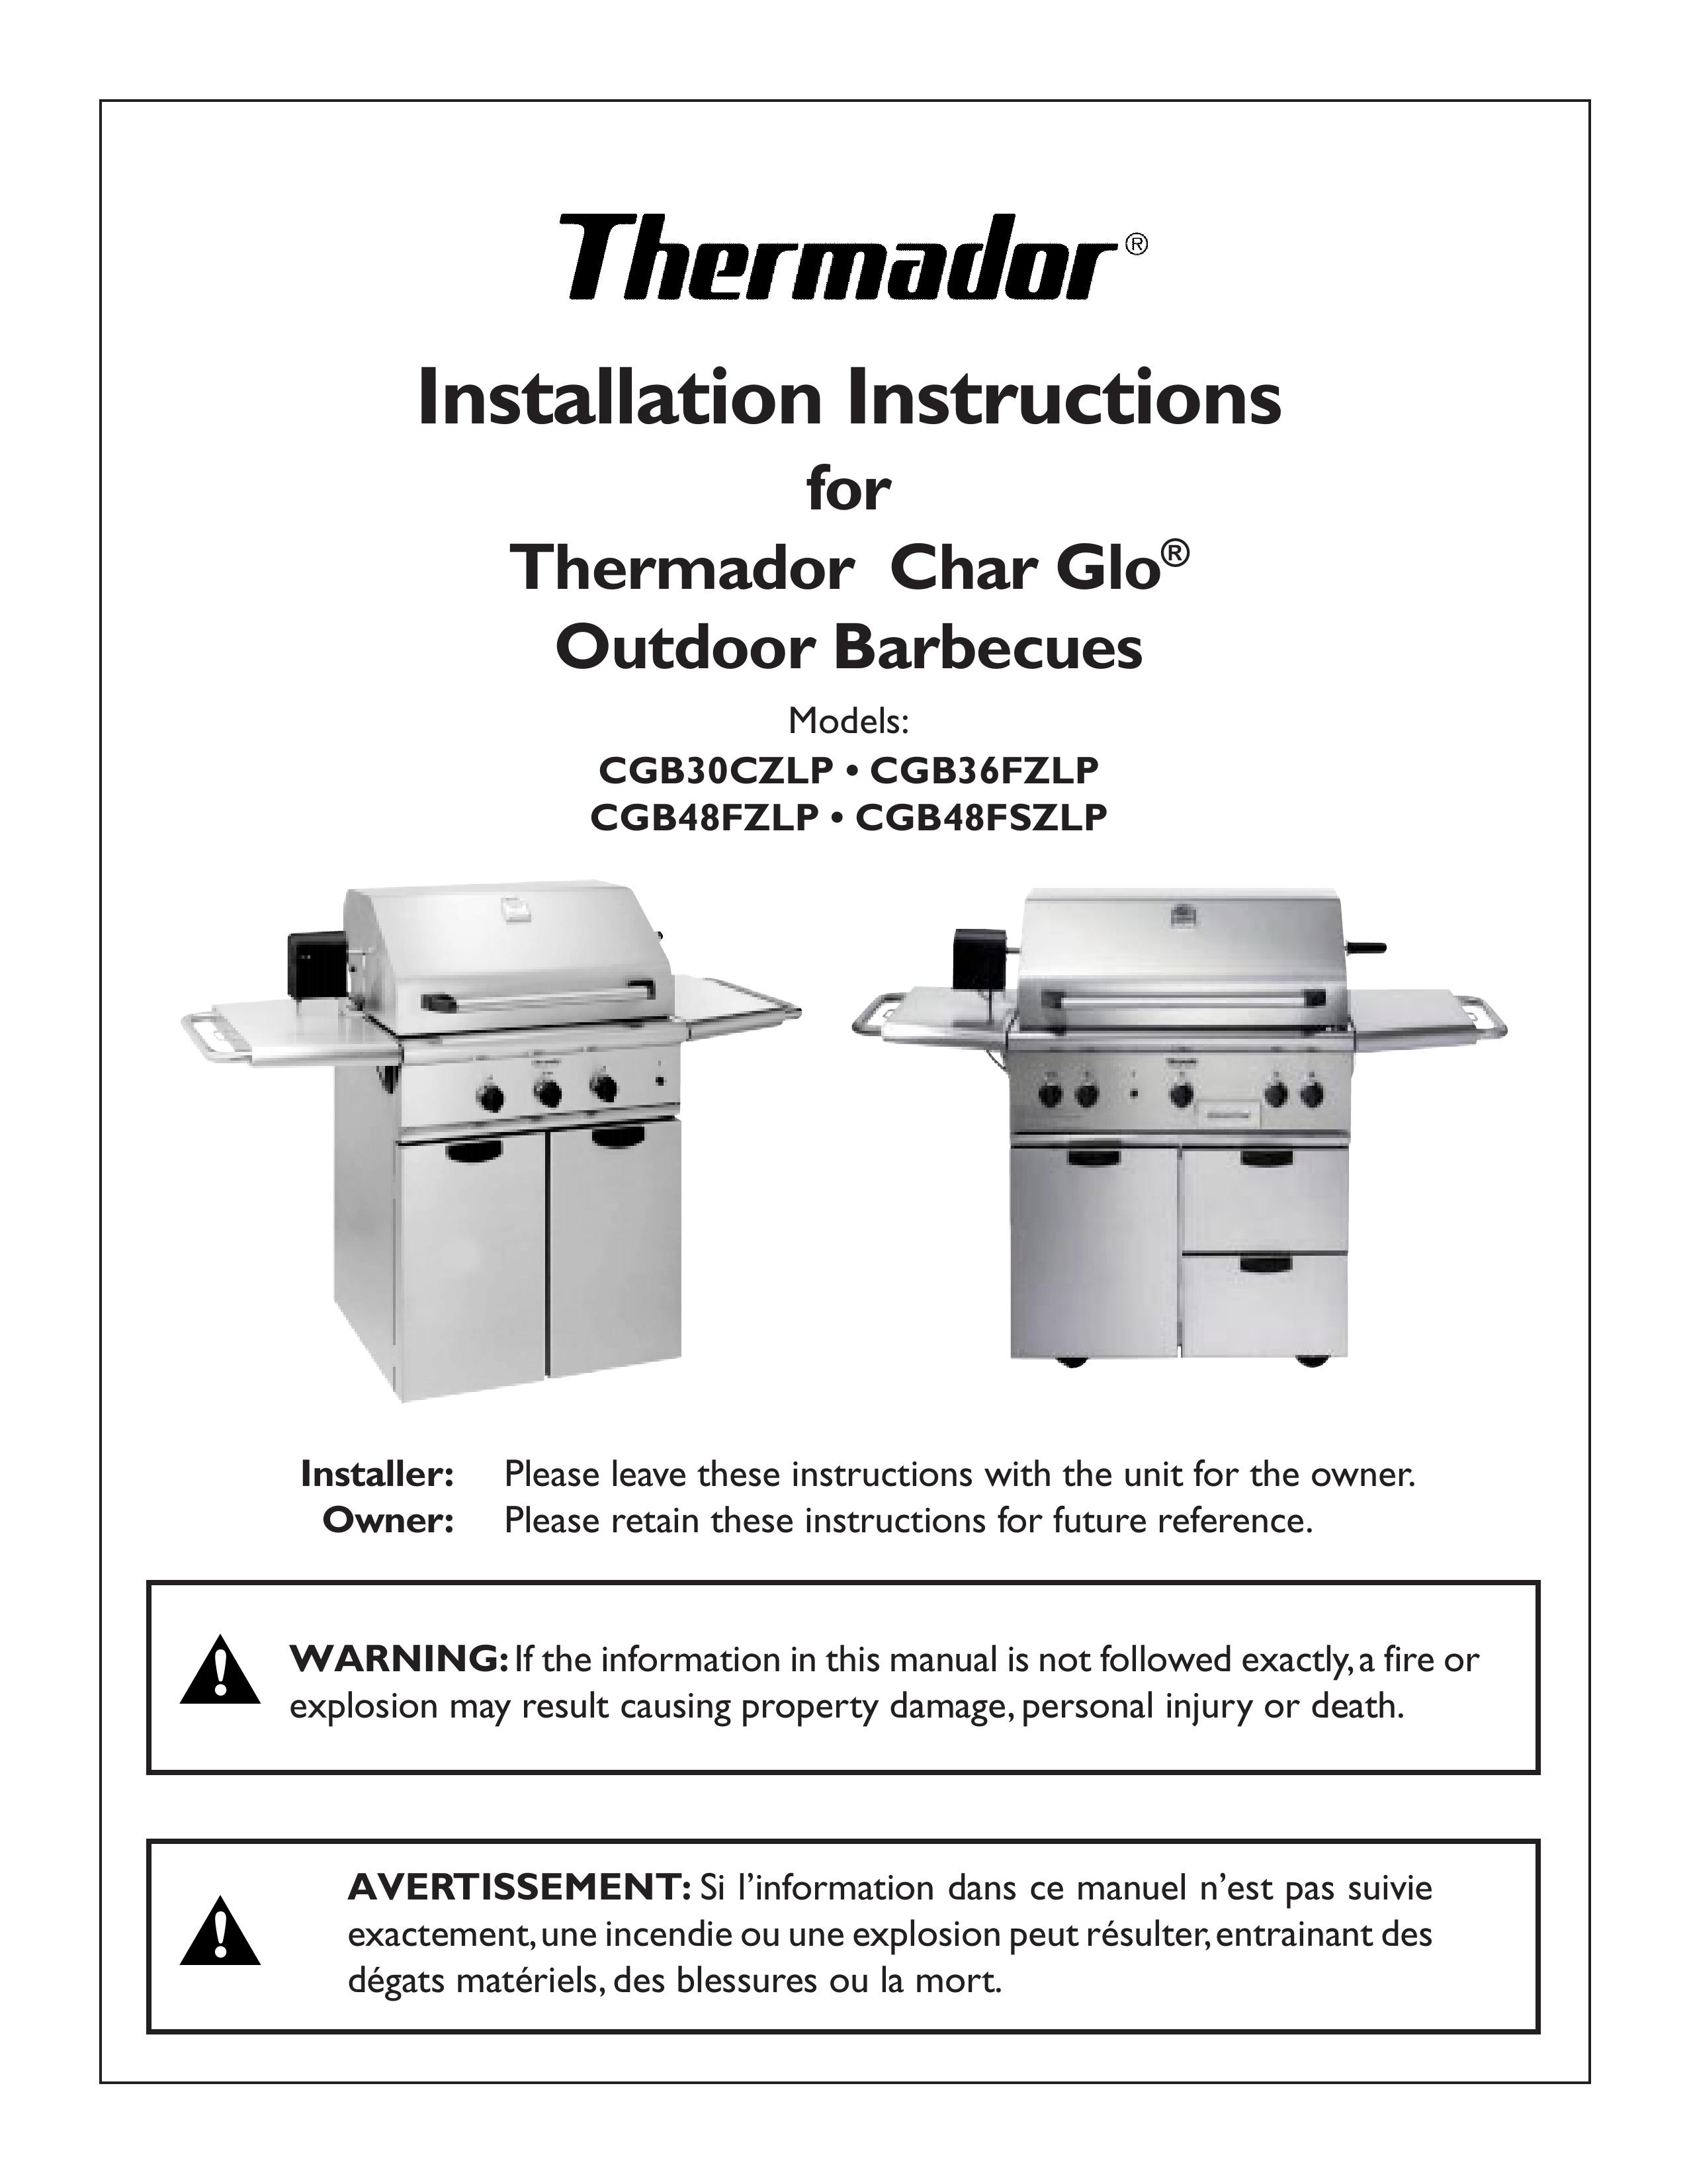 Thermador CGB48FZLP Charcoal Grill User Manual